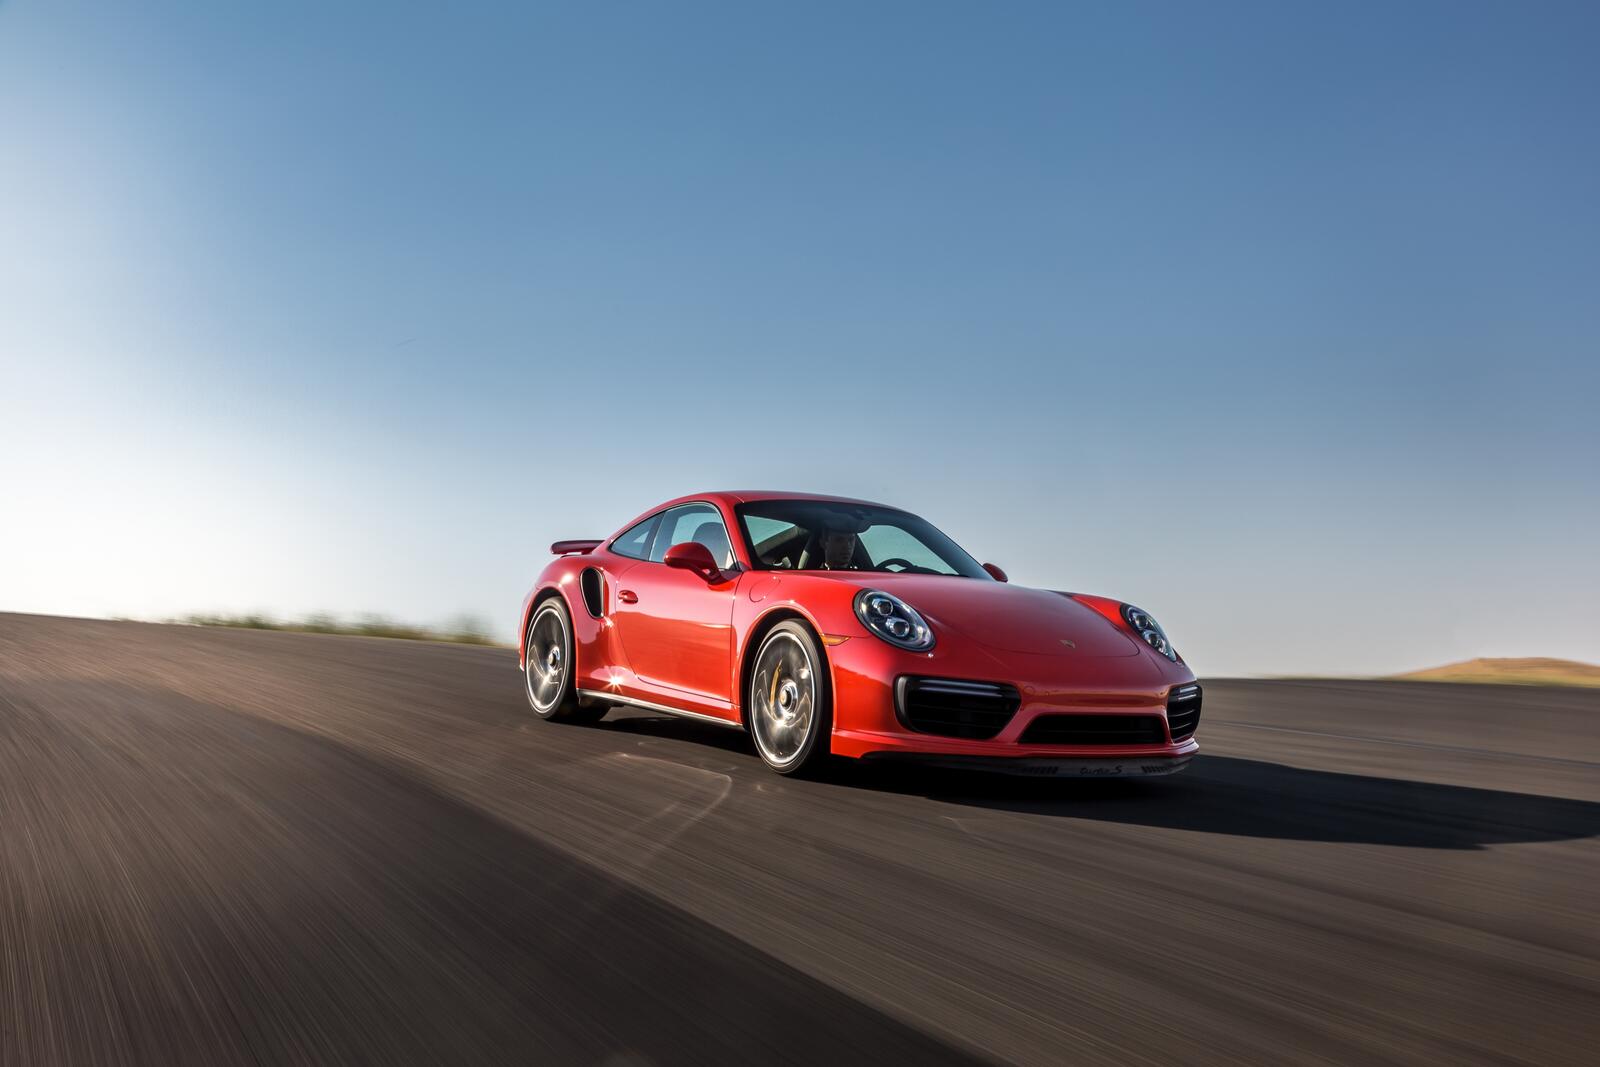 Free photo Desktop wallpaper with a red Porsche 911 in motion